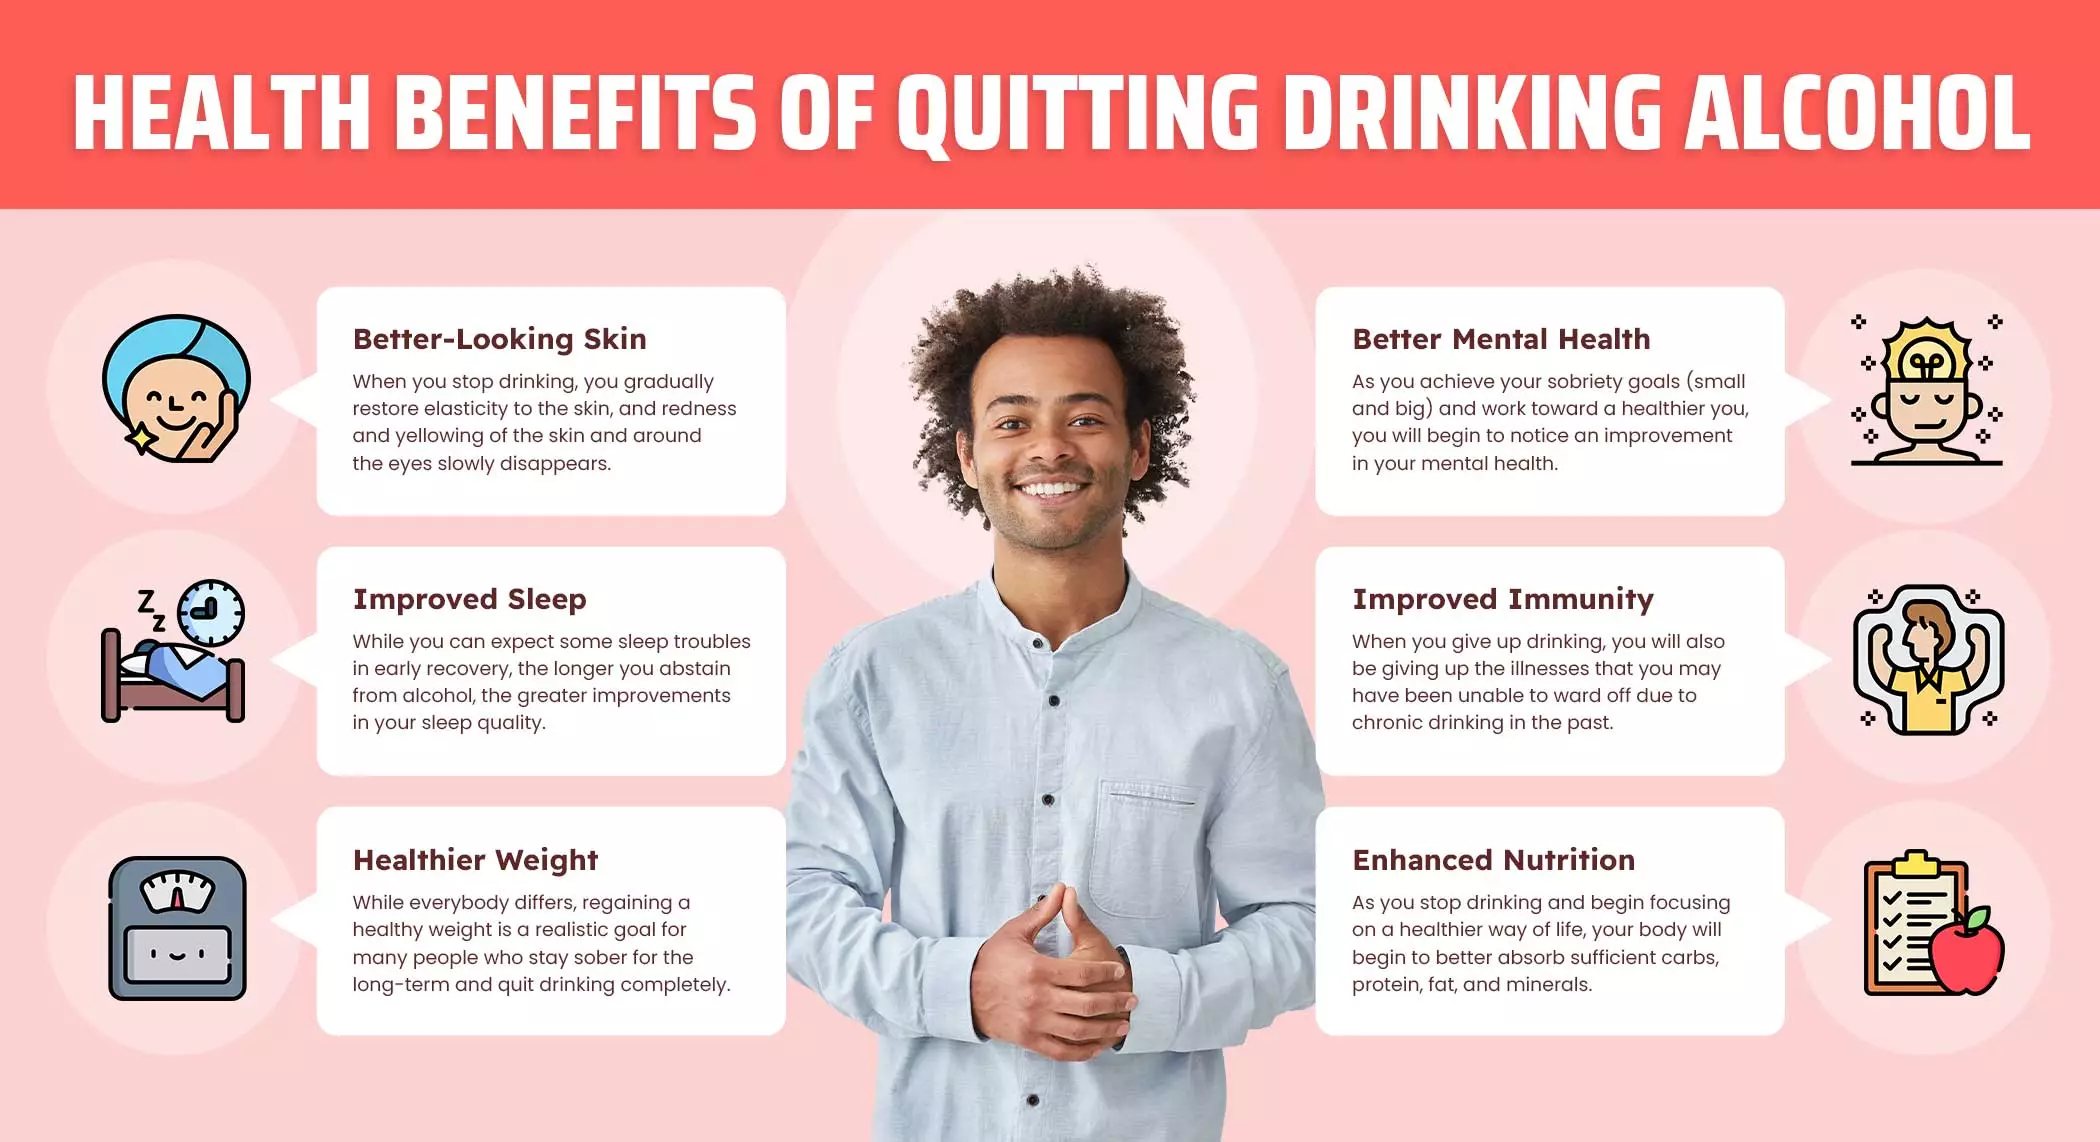 https://allamericandetox.com/wp-content/uploads/2021/01/health-benefits-of-quitting-drinking-alcohol-All-American.webp